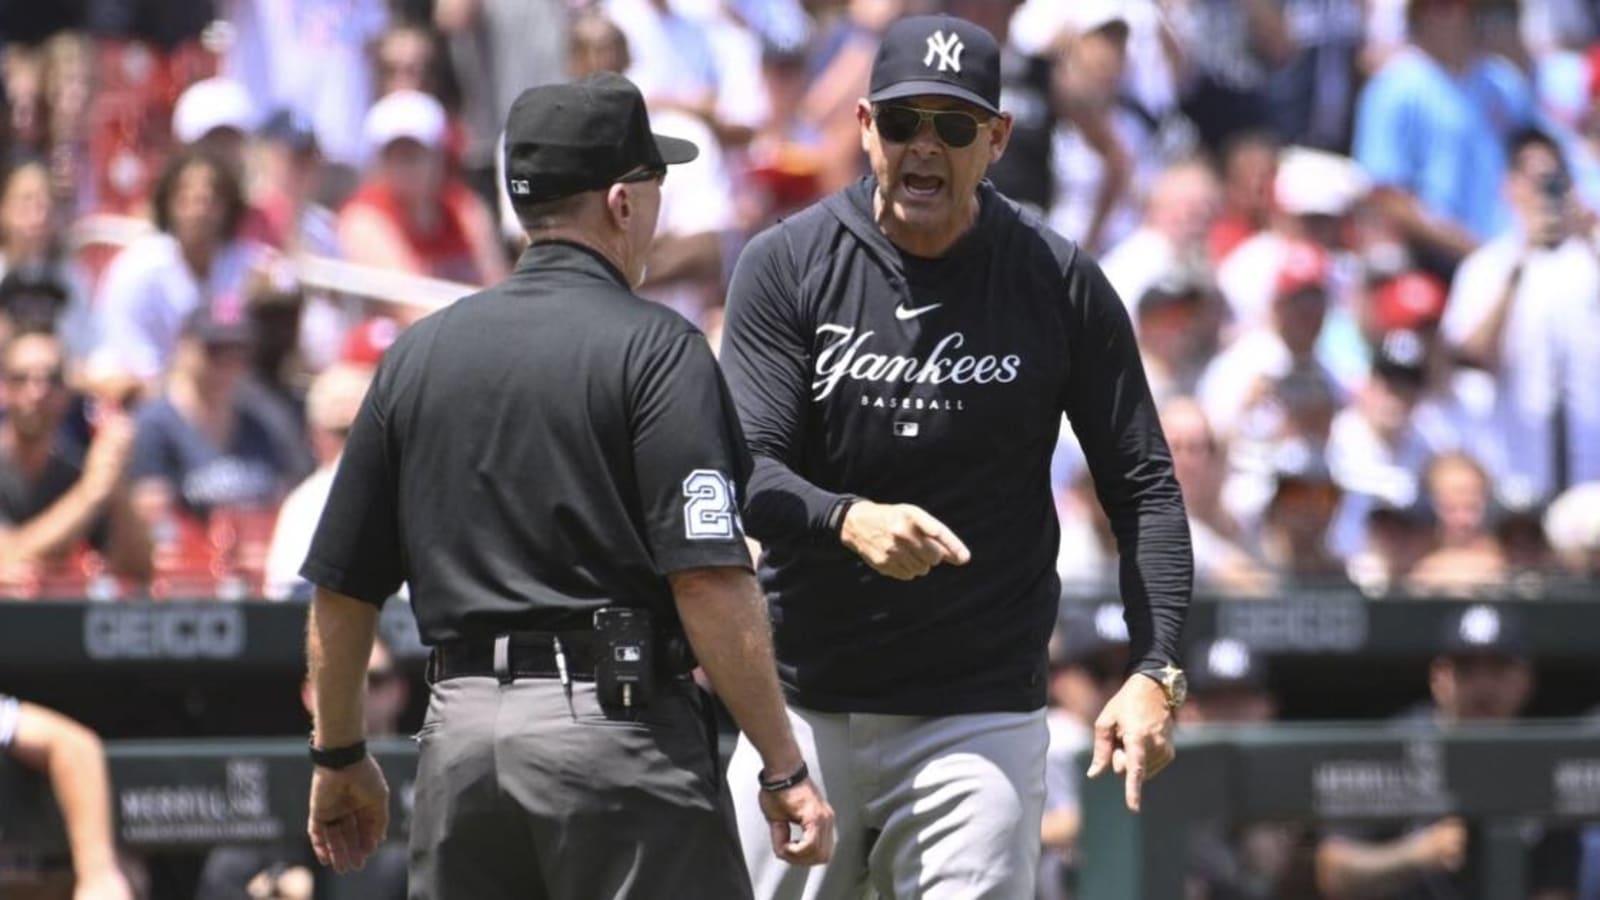 Aaron Boone ejected after mocking umpire in Yankees-White Sox game